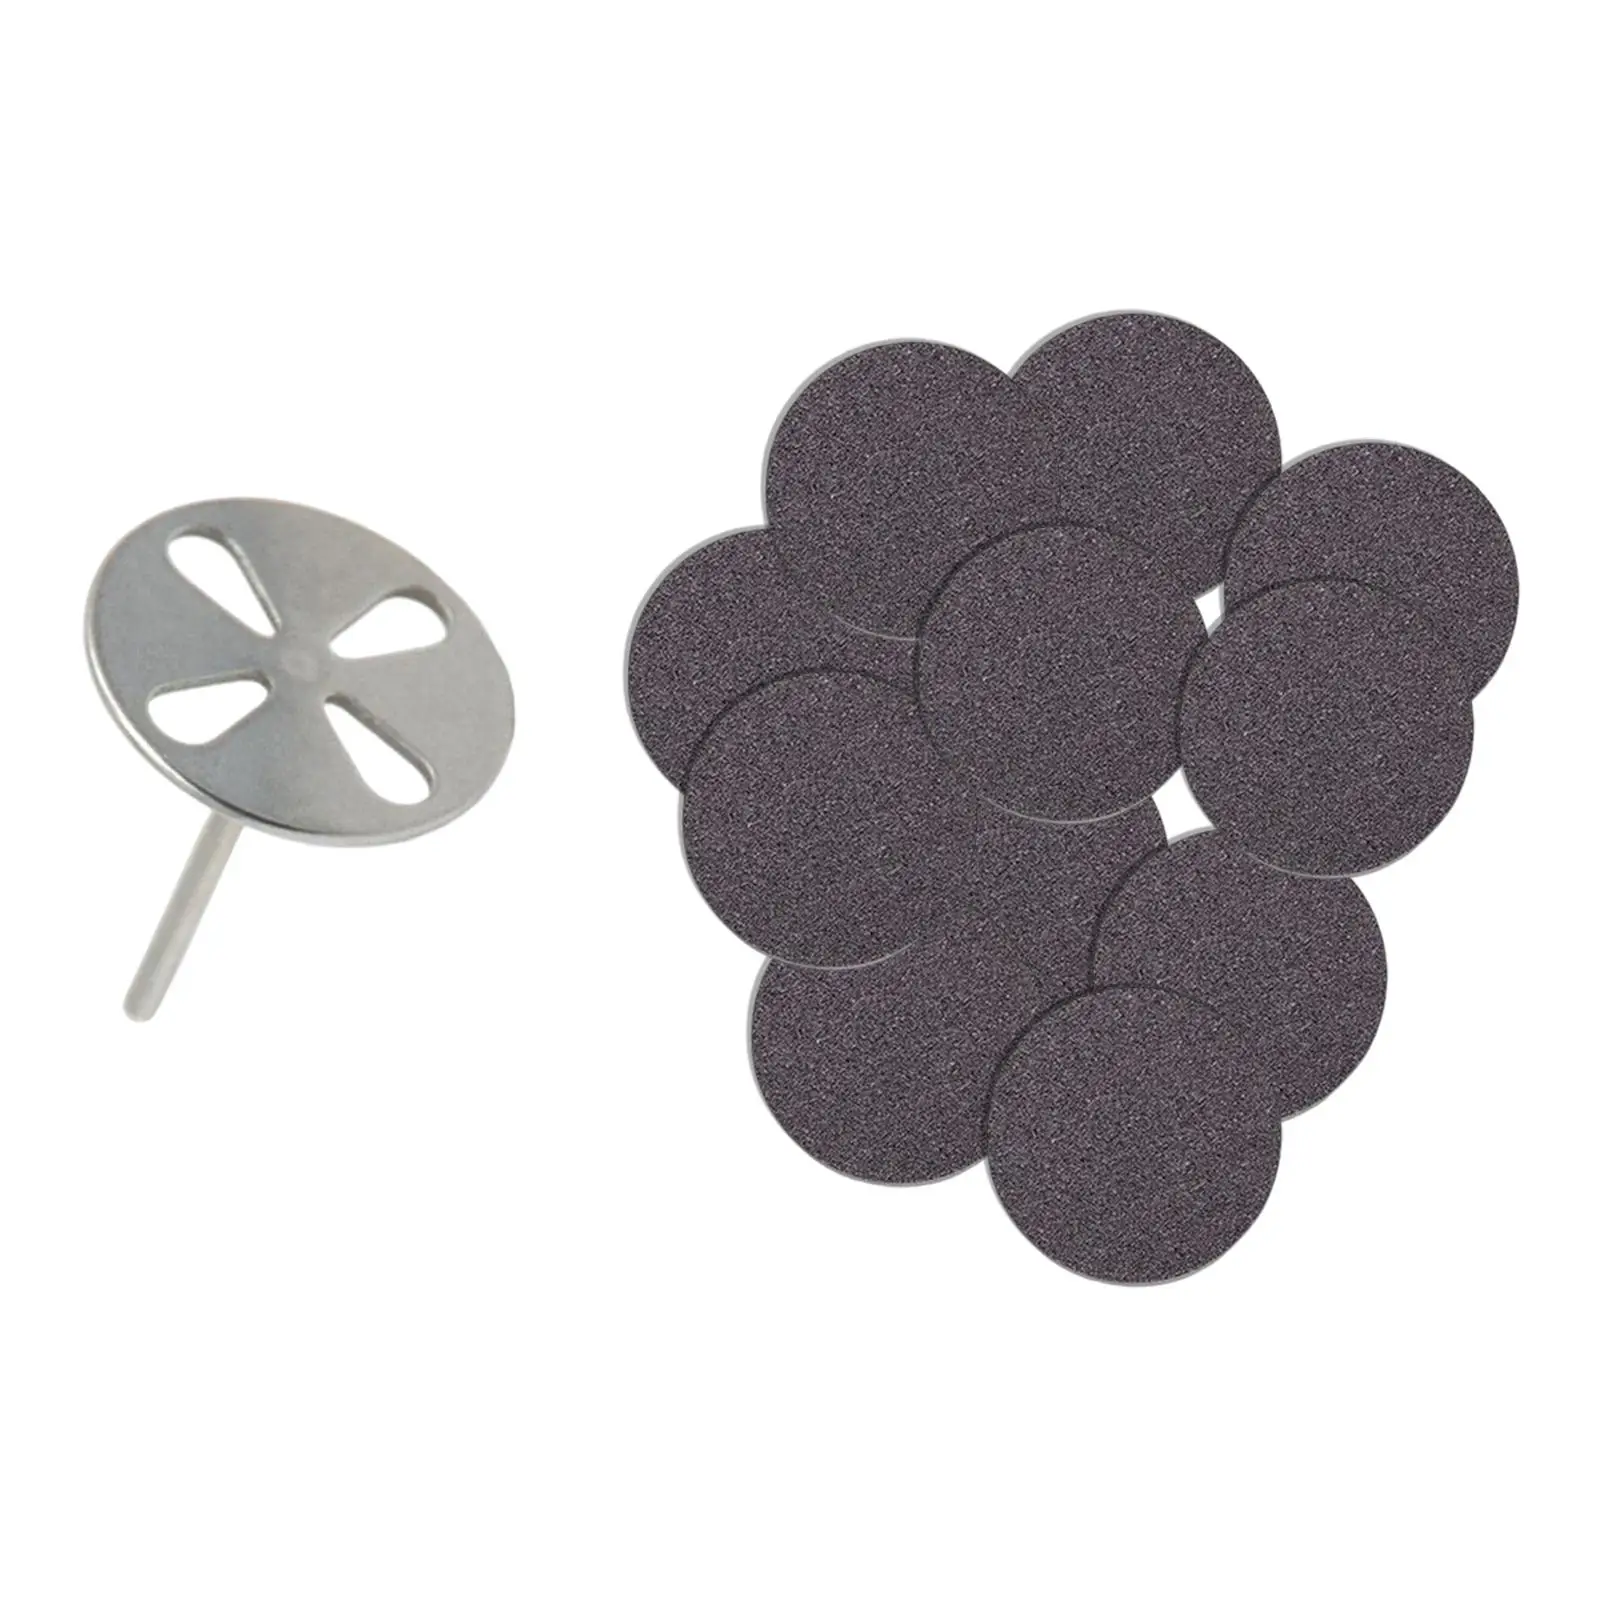 100Pcs 25mm Sand Papers Grinding Disc Tool Replacement for Electric Foot File Quick Shortening Nails Pedicure Tool Hard Skin